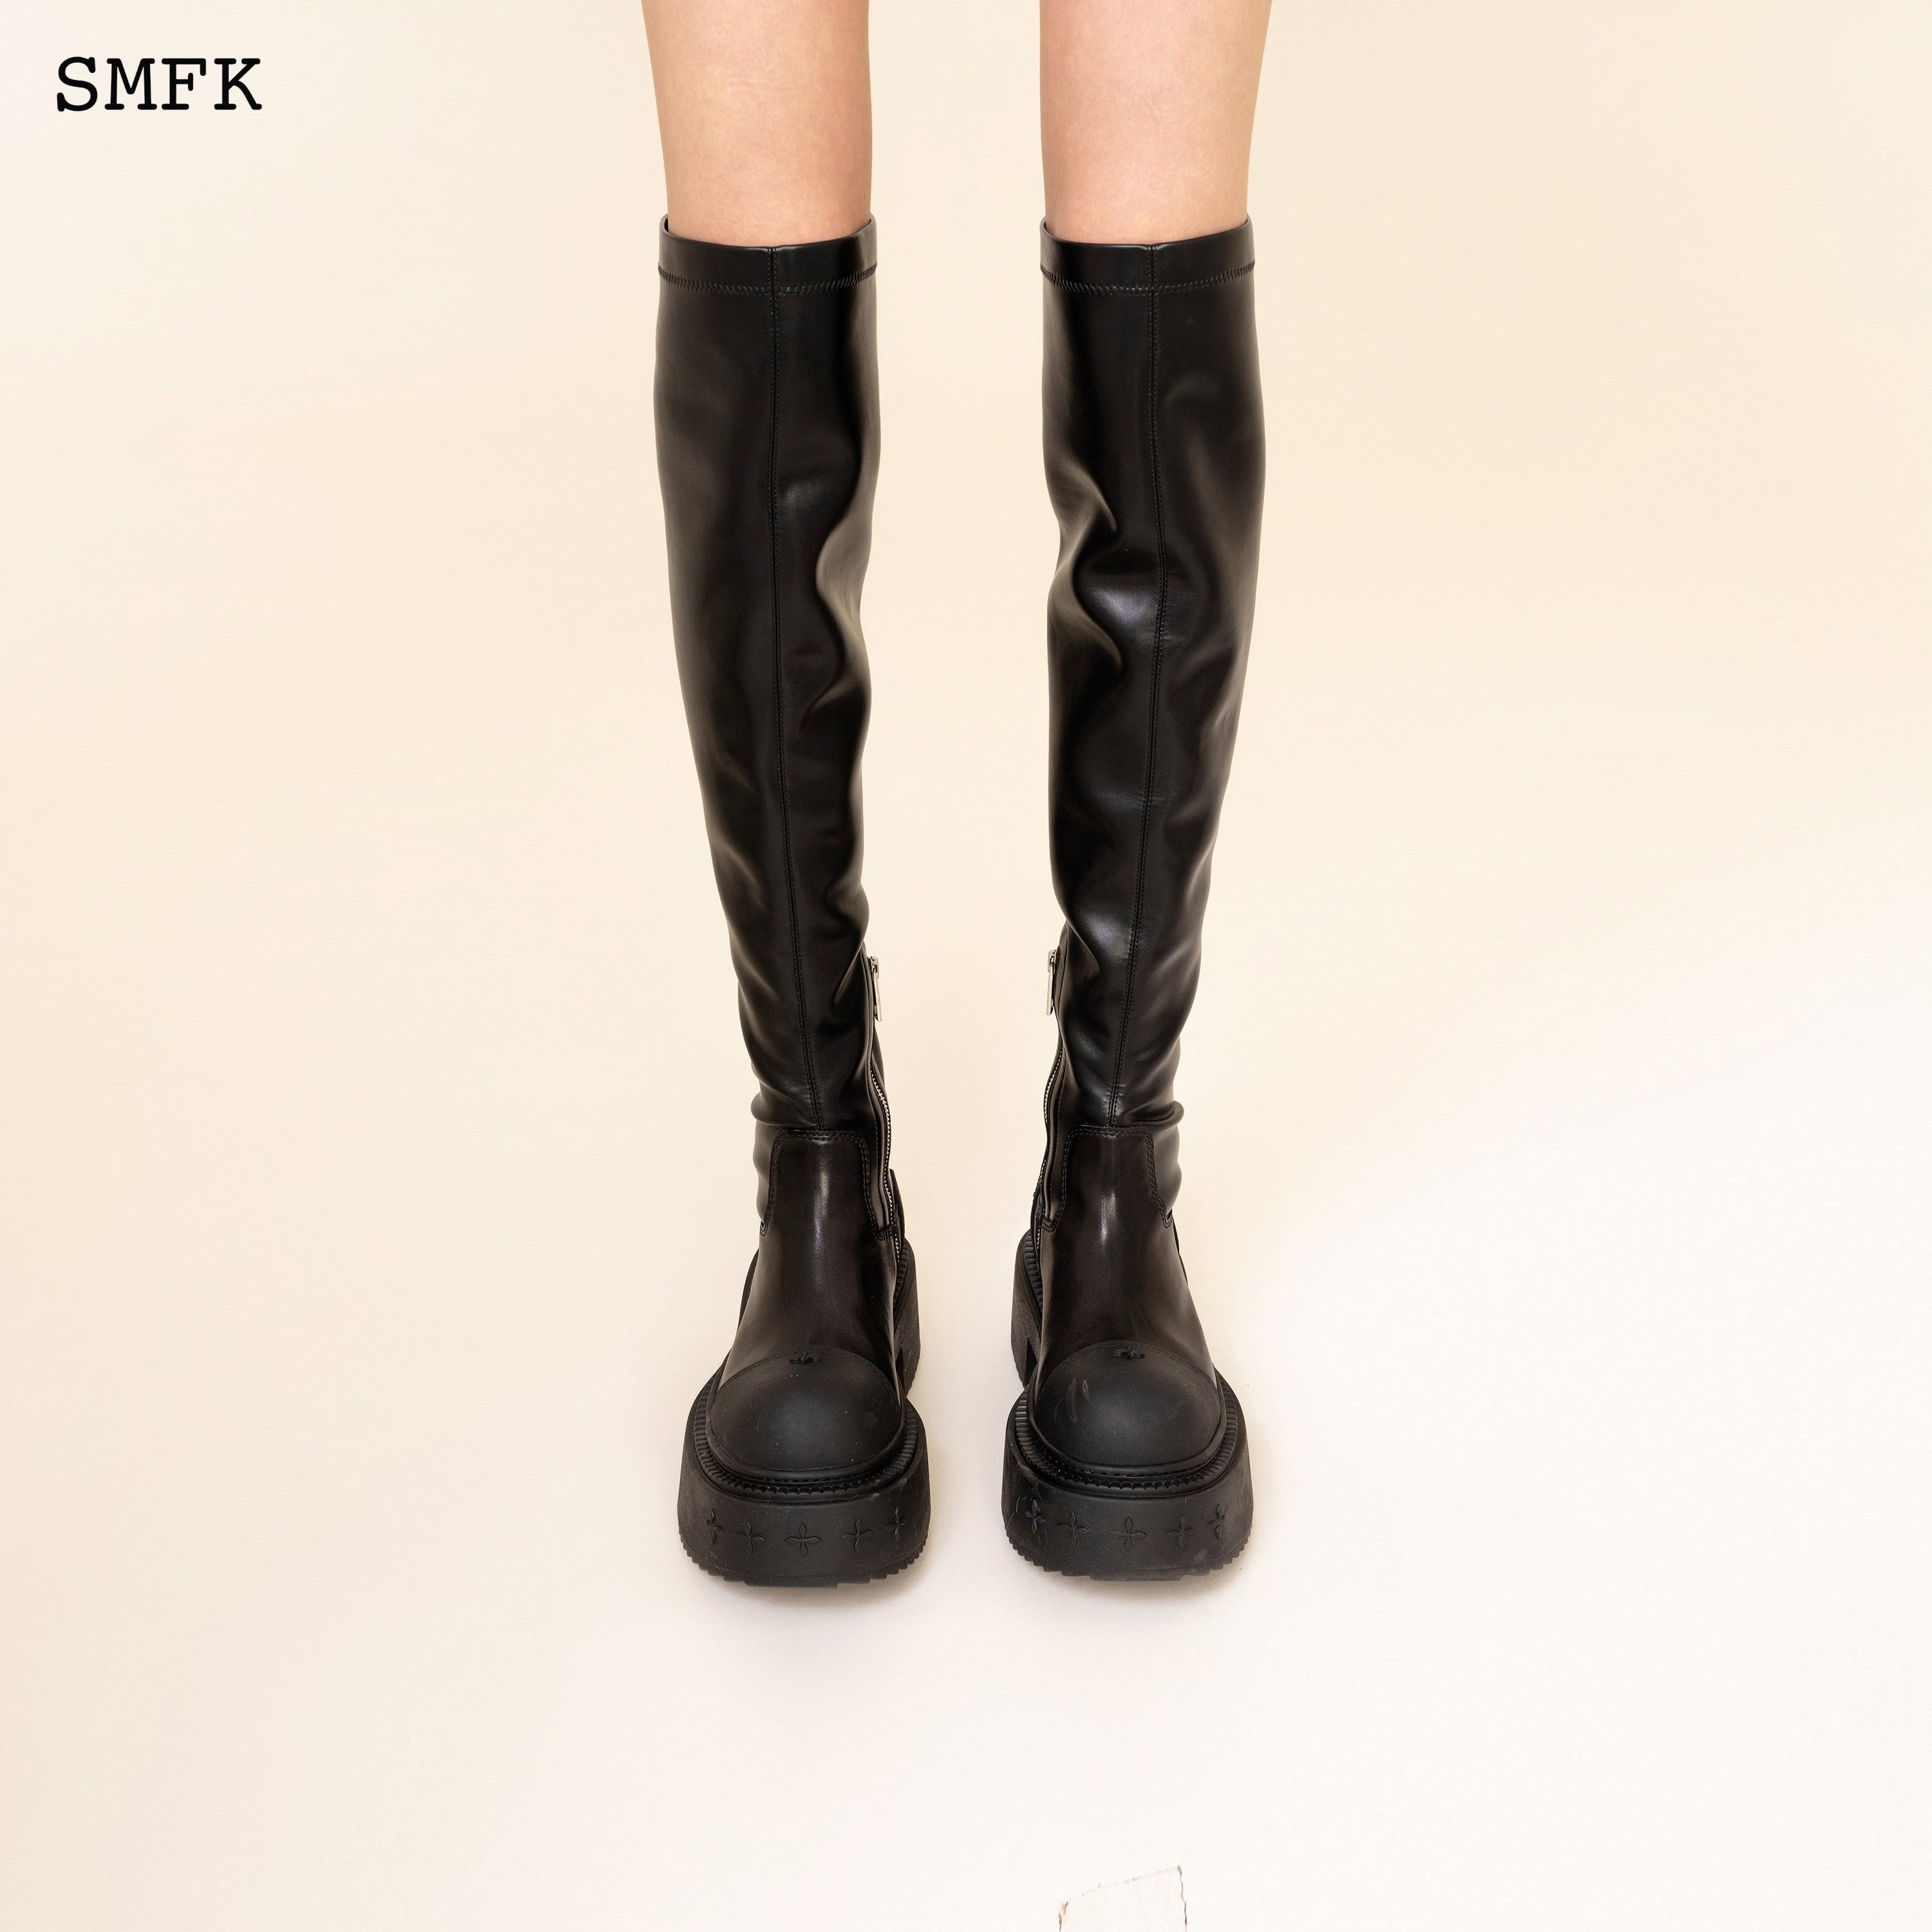 Compass Rider High Boots In Black - SMFK Official